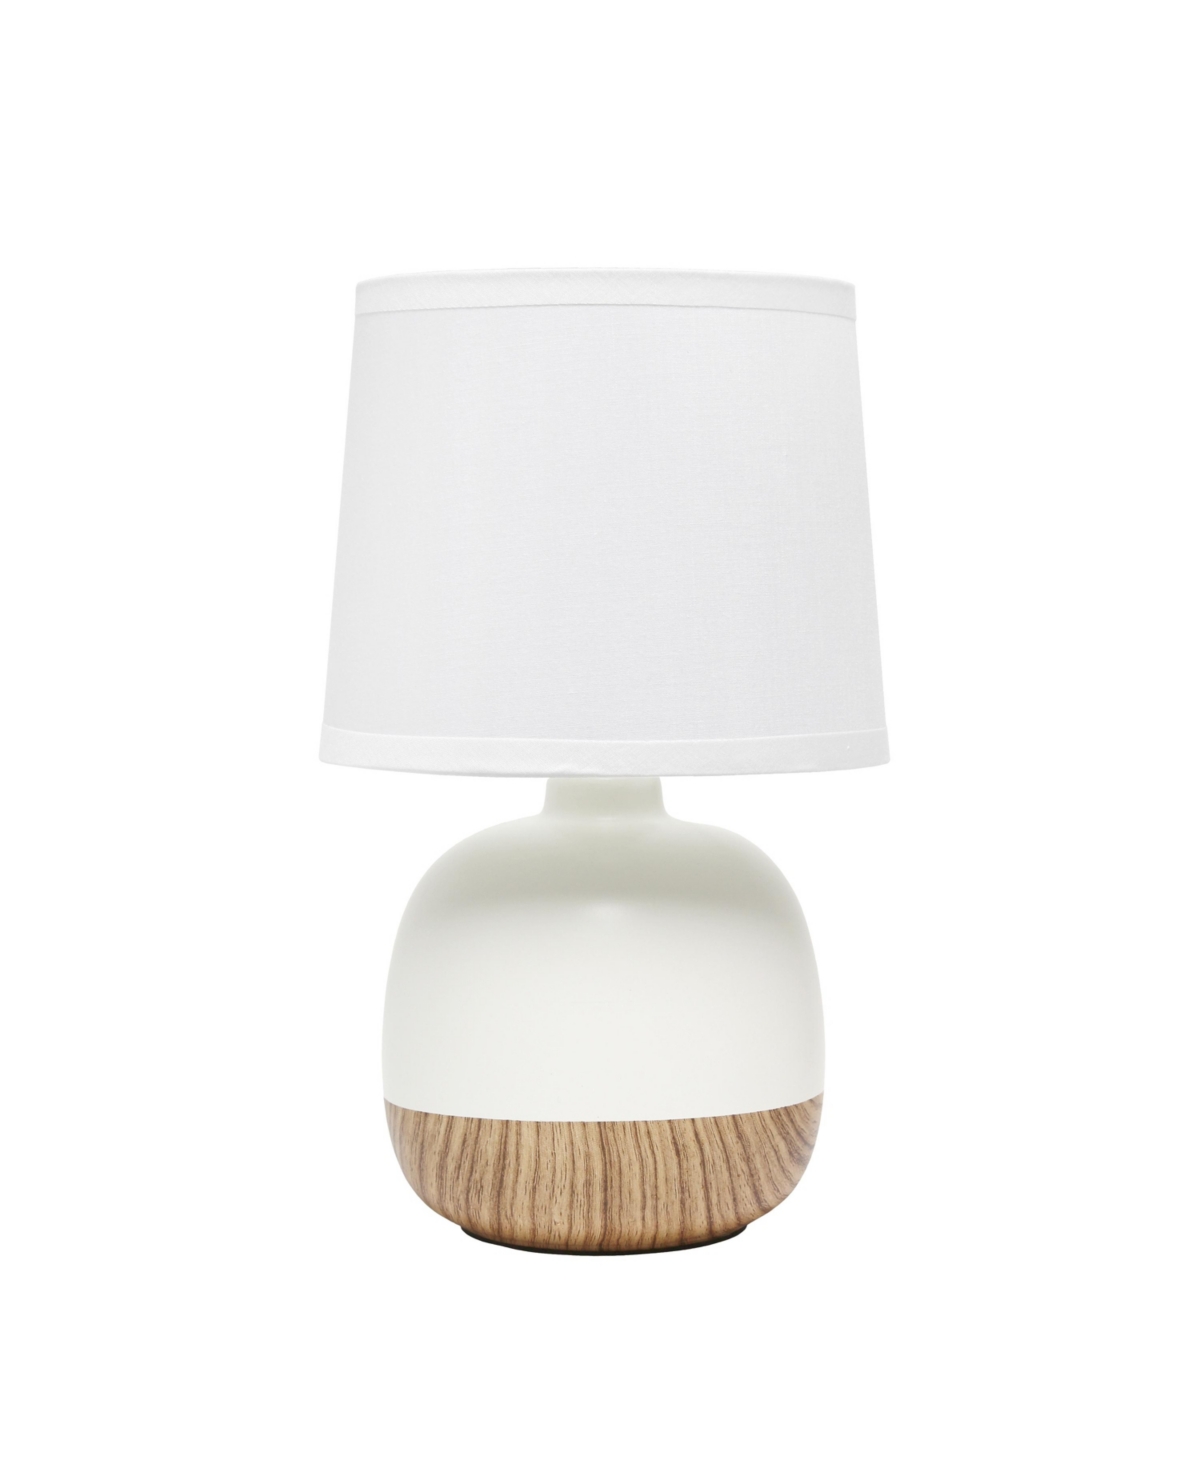 Simple Designs Petite Mid Century Table Lamp In Light Wood With Off White